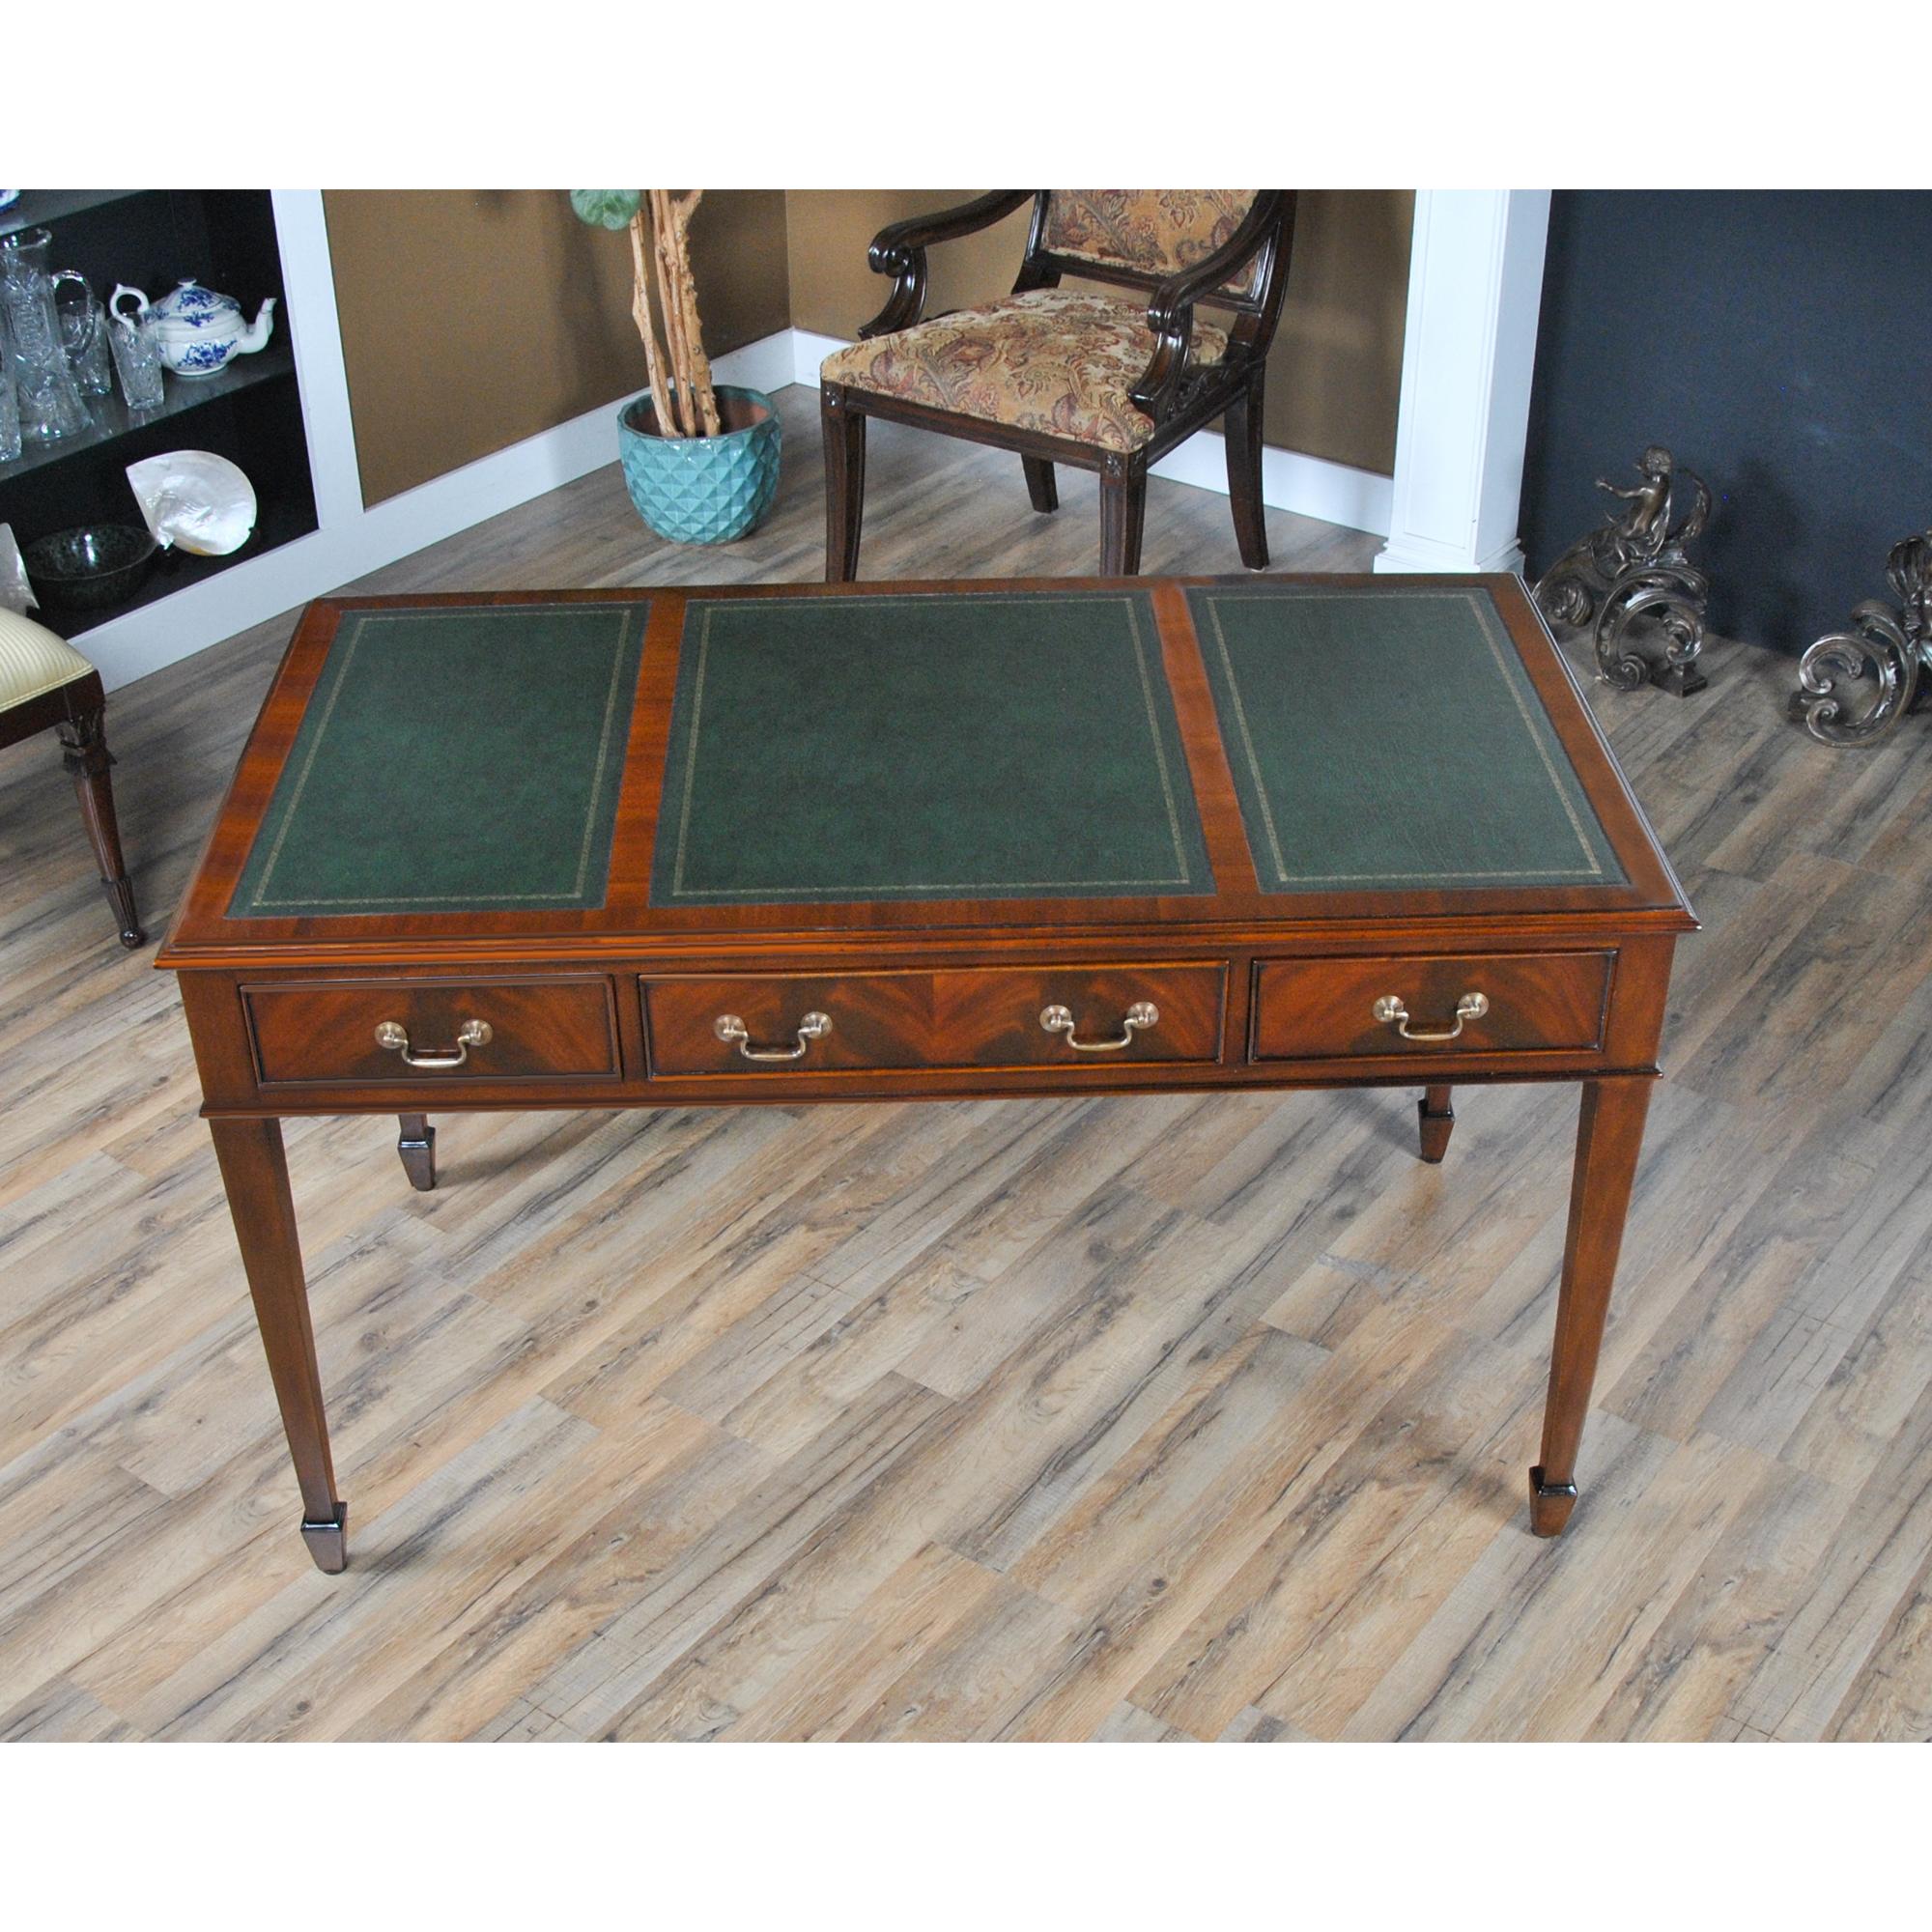 An elegant Mahogany Writing Table Green Leather by Niagara Furniture which is a perfect fit for use either at home or in the office. Features include a three panel green genuine full grained leather tooled top, solid mahogany molded edge profile,